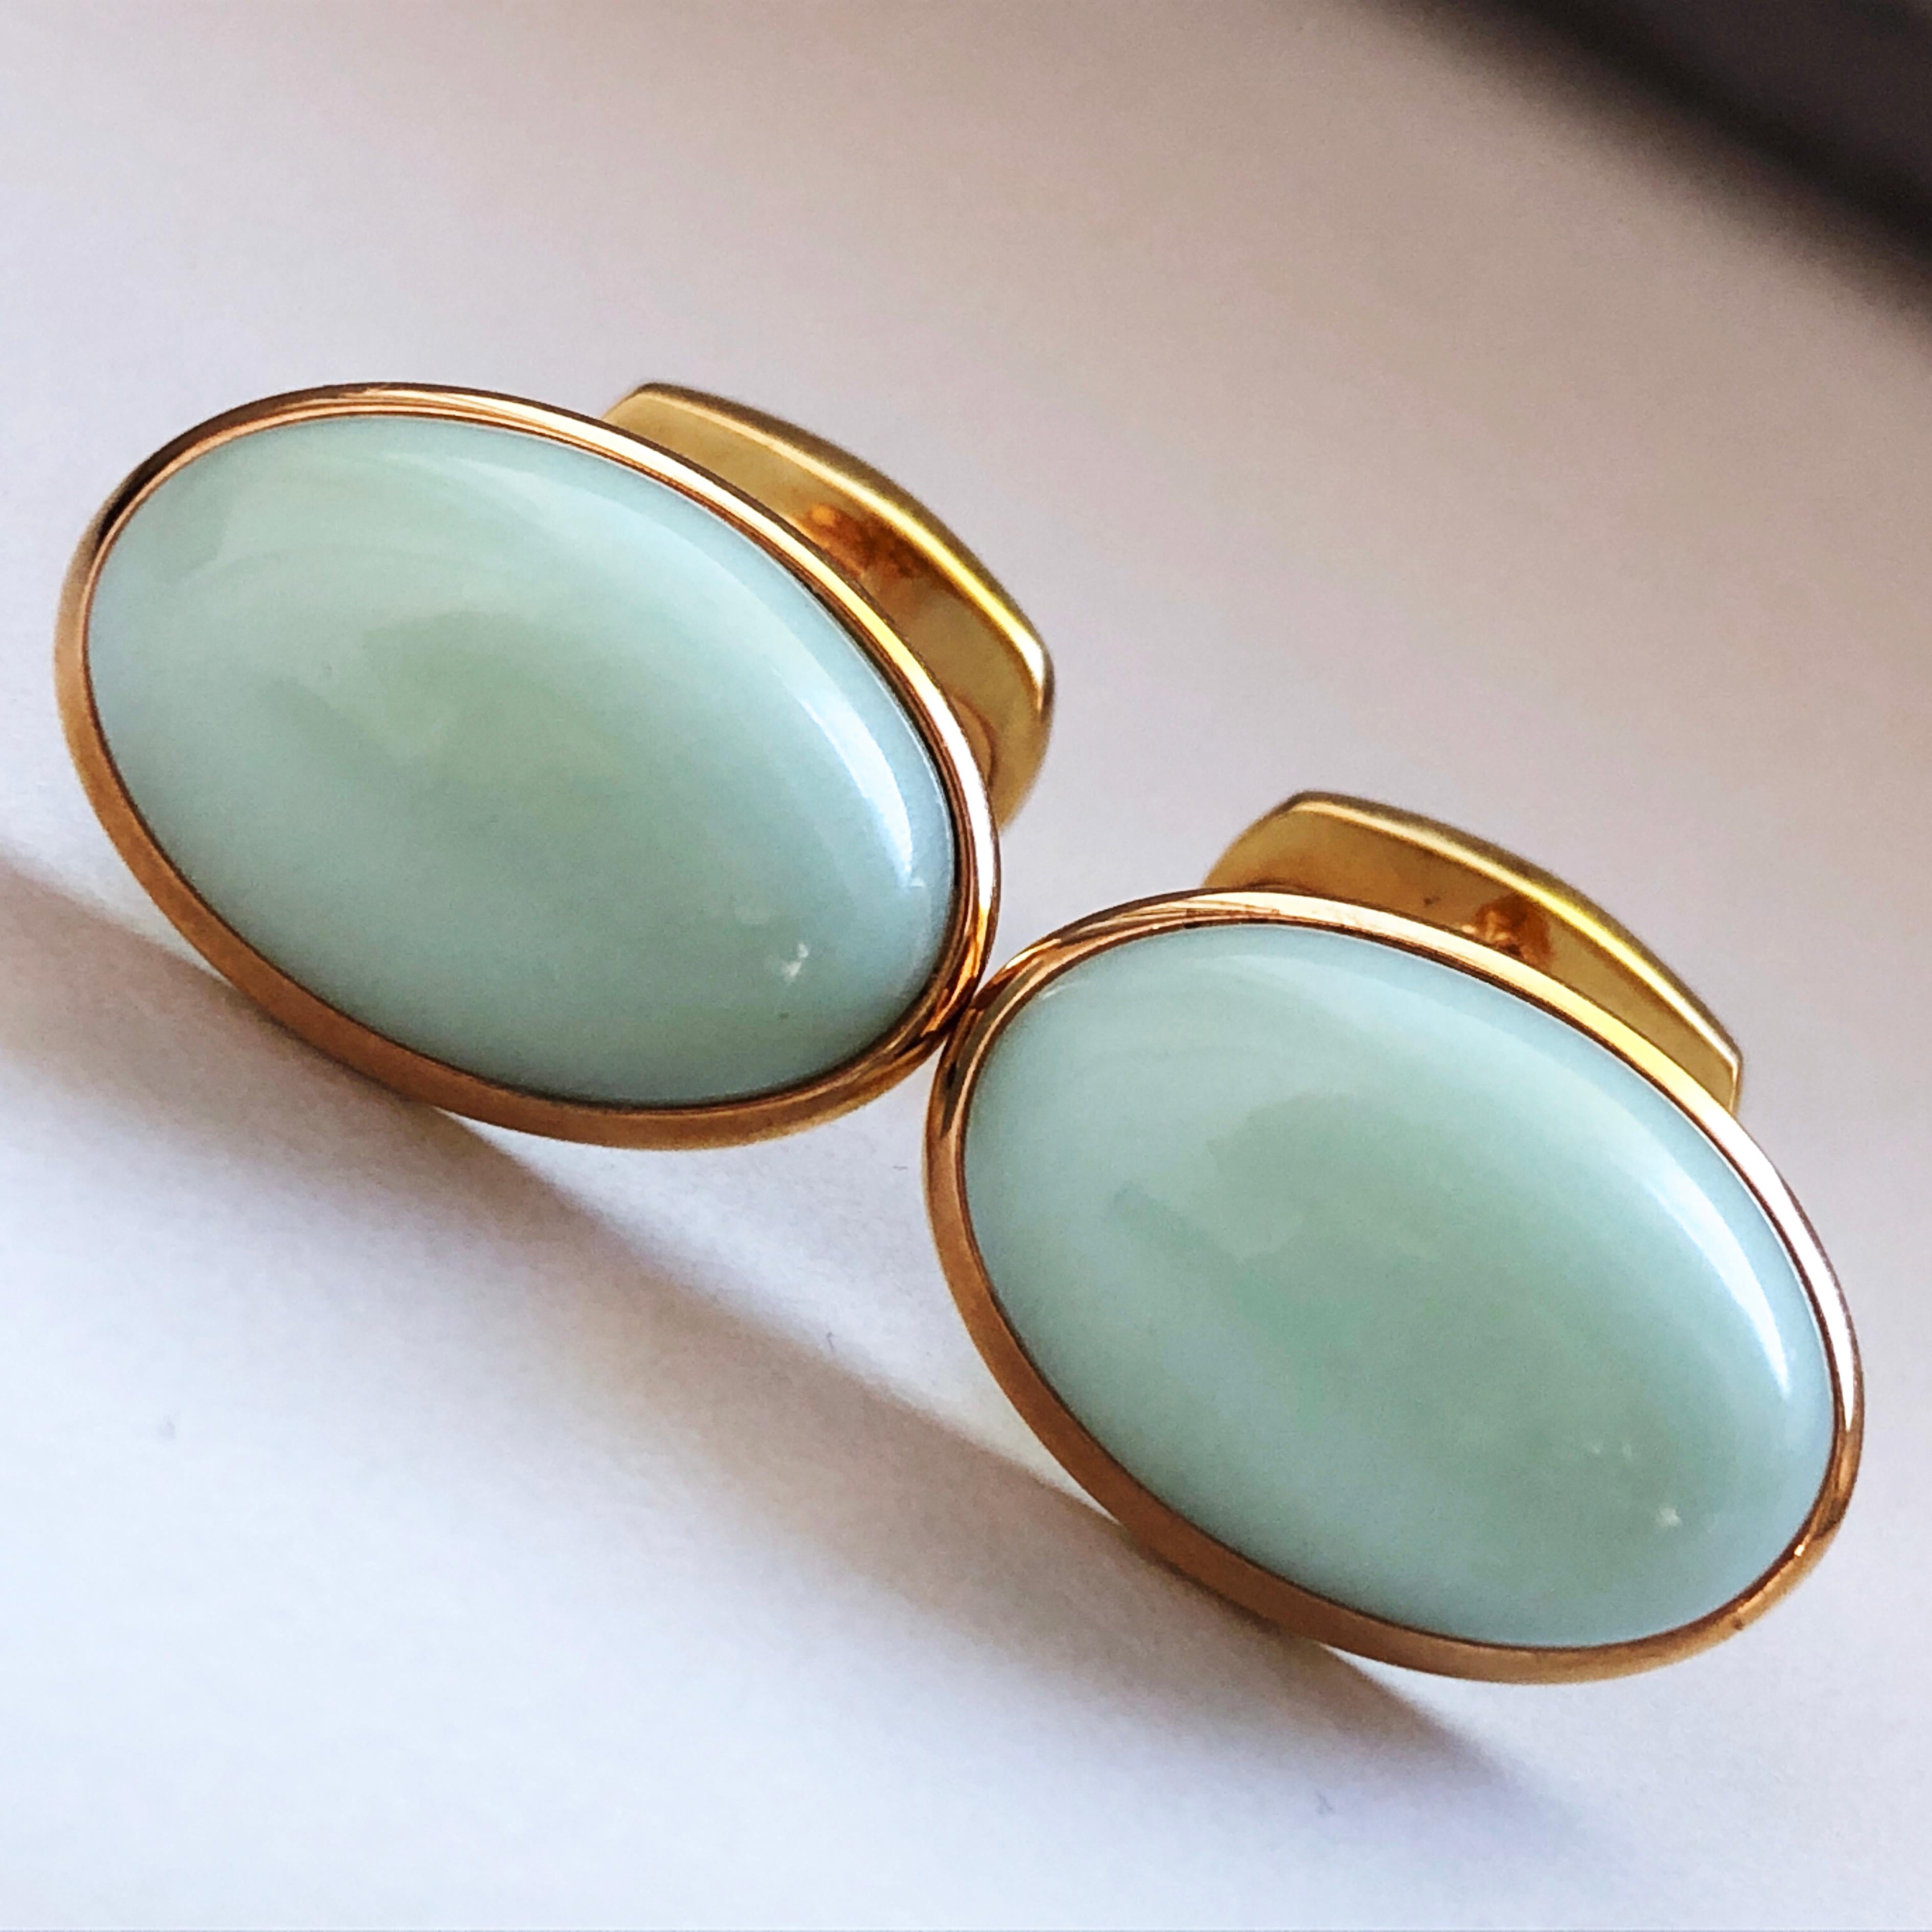 Berca Natural Green Opal Cabochon Sterling Silver Gold-Plated Cufflinks 6